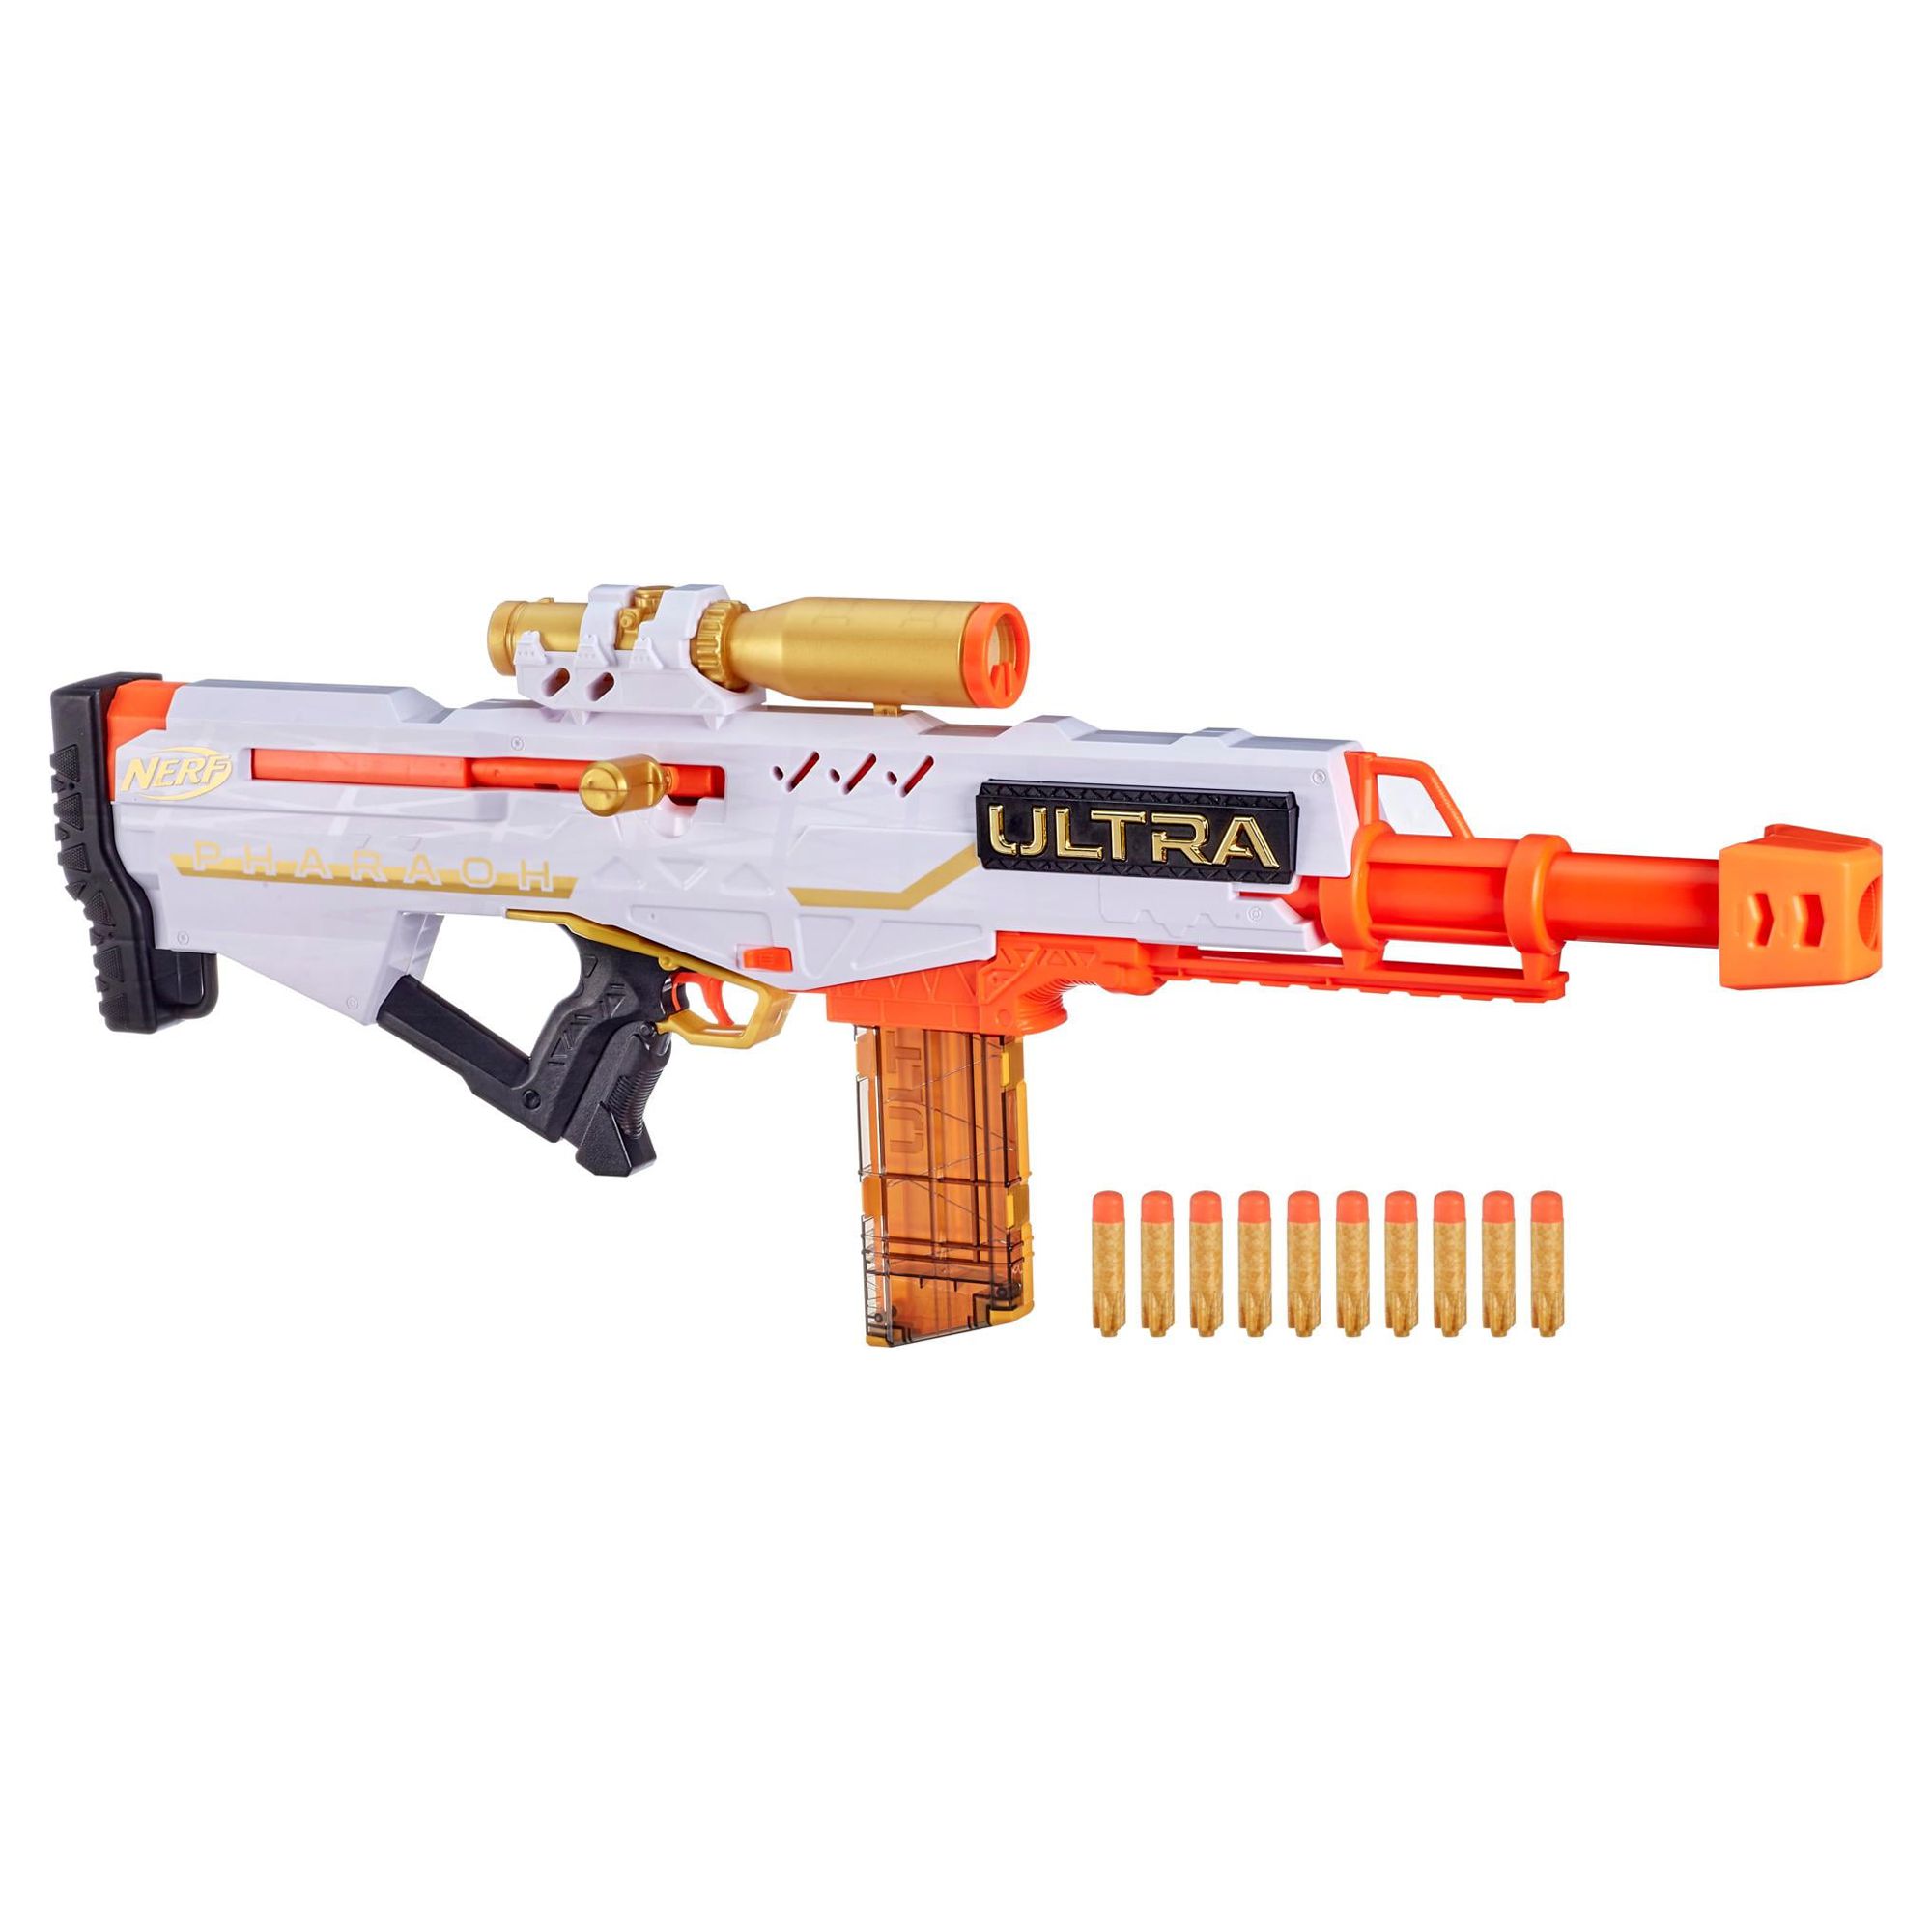 Nerf Ultra Pharaoh Blaster -- Gold Accents, 10-Dart Clip, 10 Nerf Ultra Darts, Compatible Only with Nerf Ultra Darts - image 1 of 7